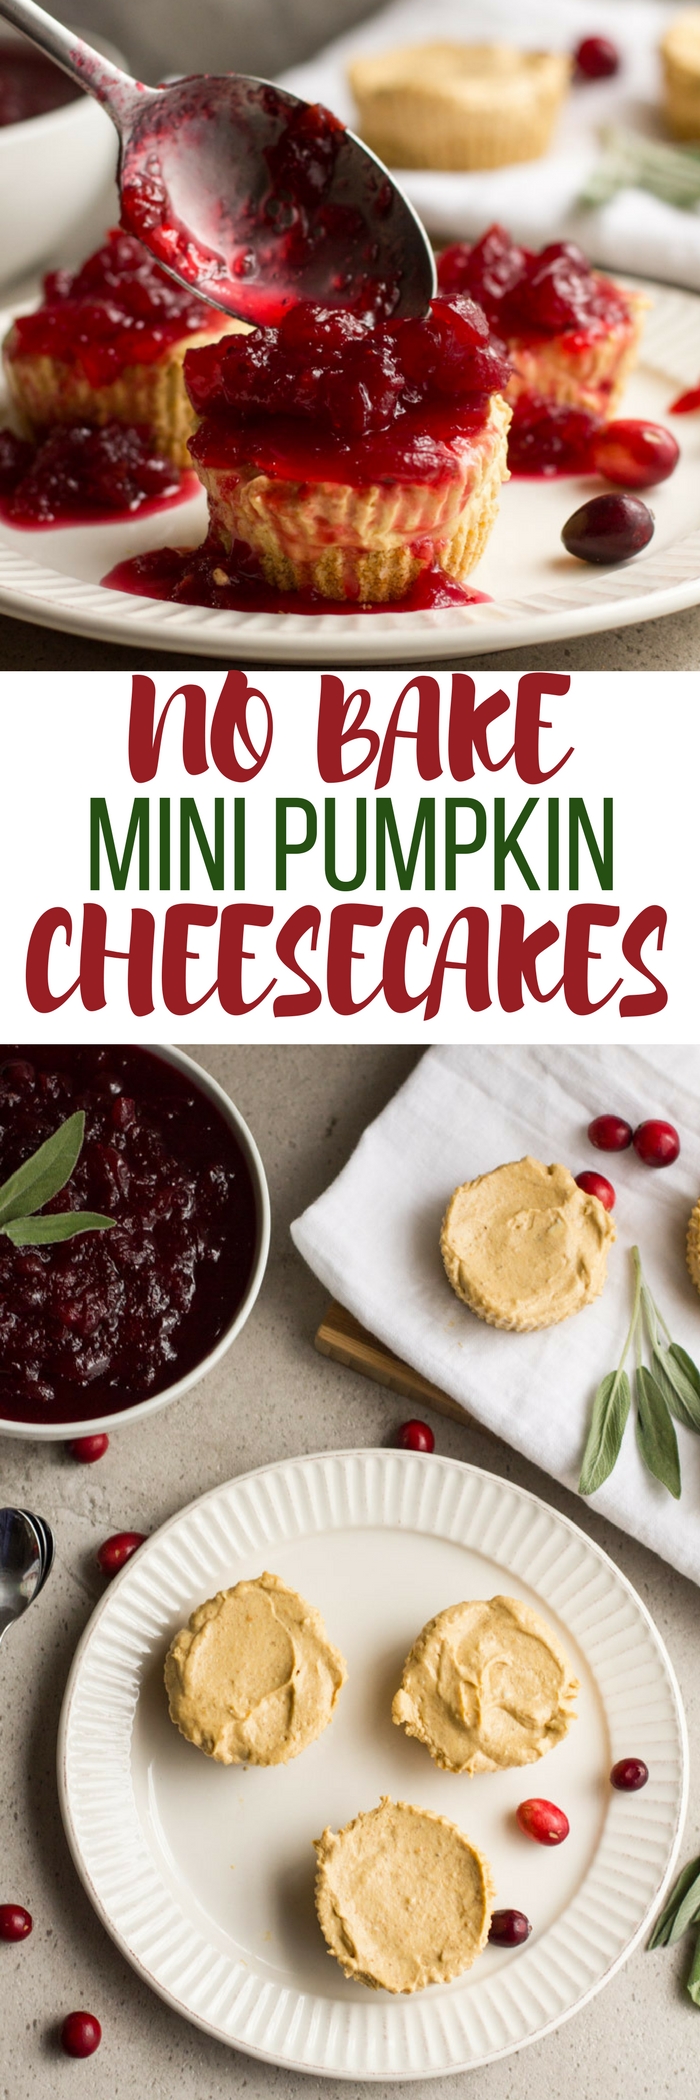 No bake pumpkin cheesecakes make party planning a breeze. Prep these mini cheesecakes and the cranberry topping ahead and chill in the fridge until the big day. Perfect for Thanksgiving and the holiday season. #ad